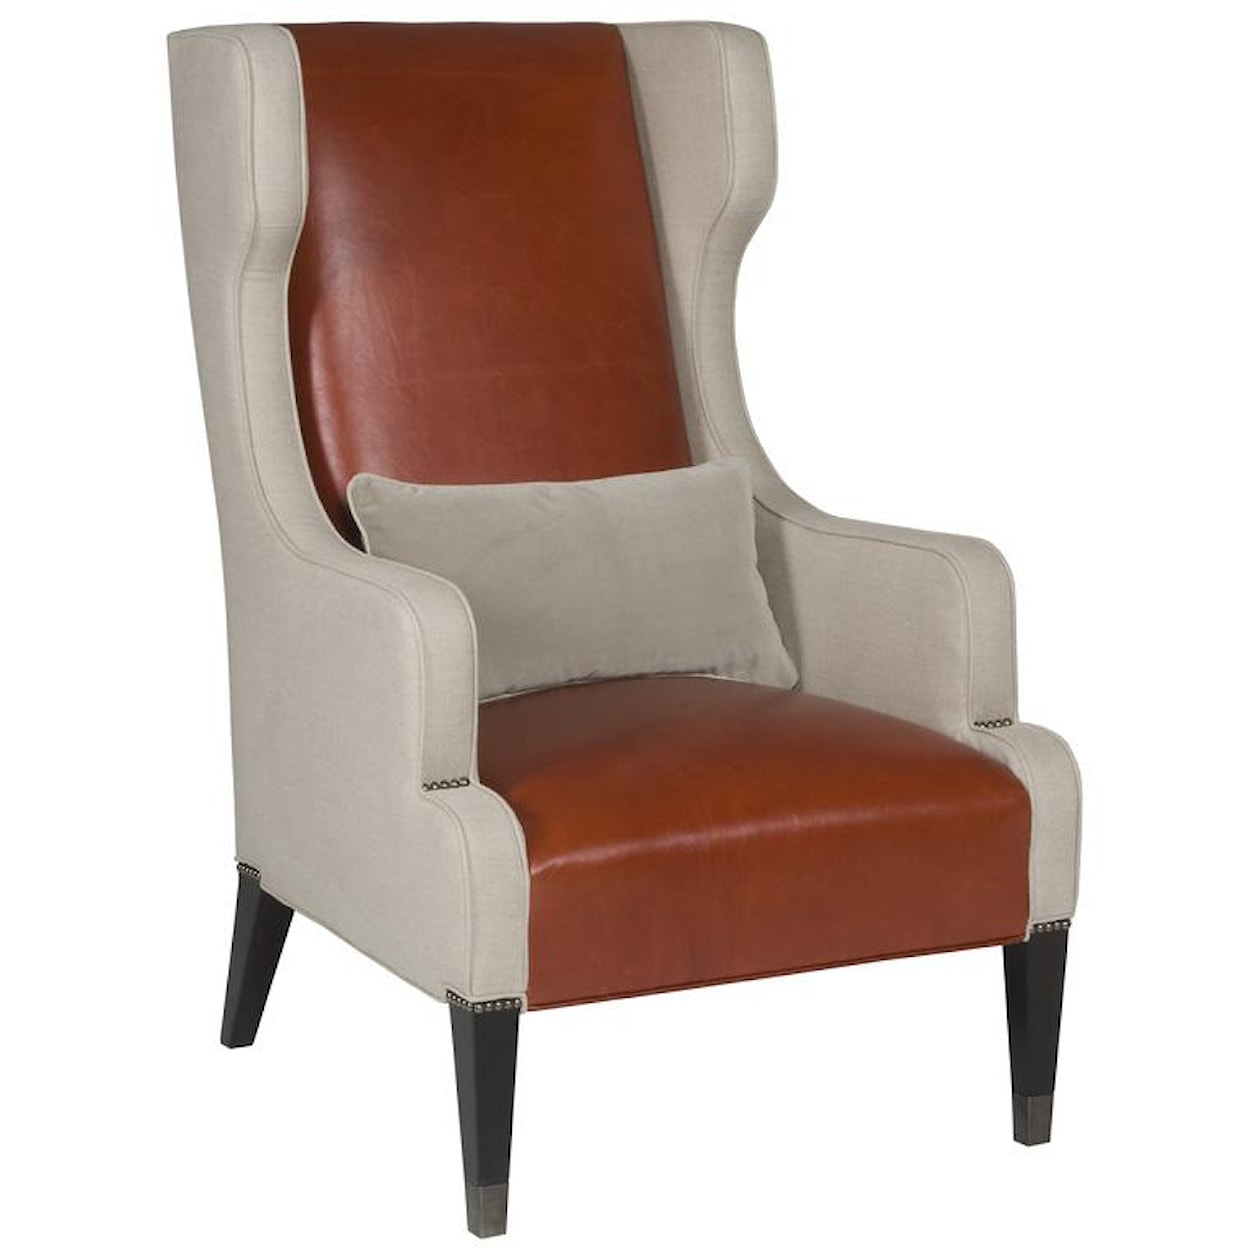 Vanguard Furniture Thom Filicia Home Collection Wing Chair